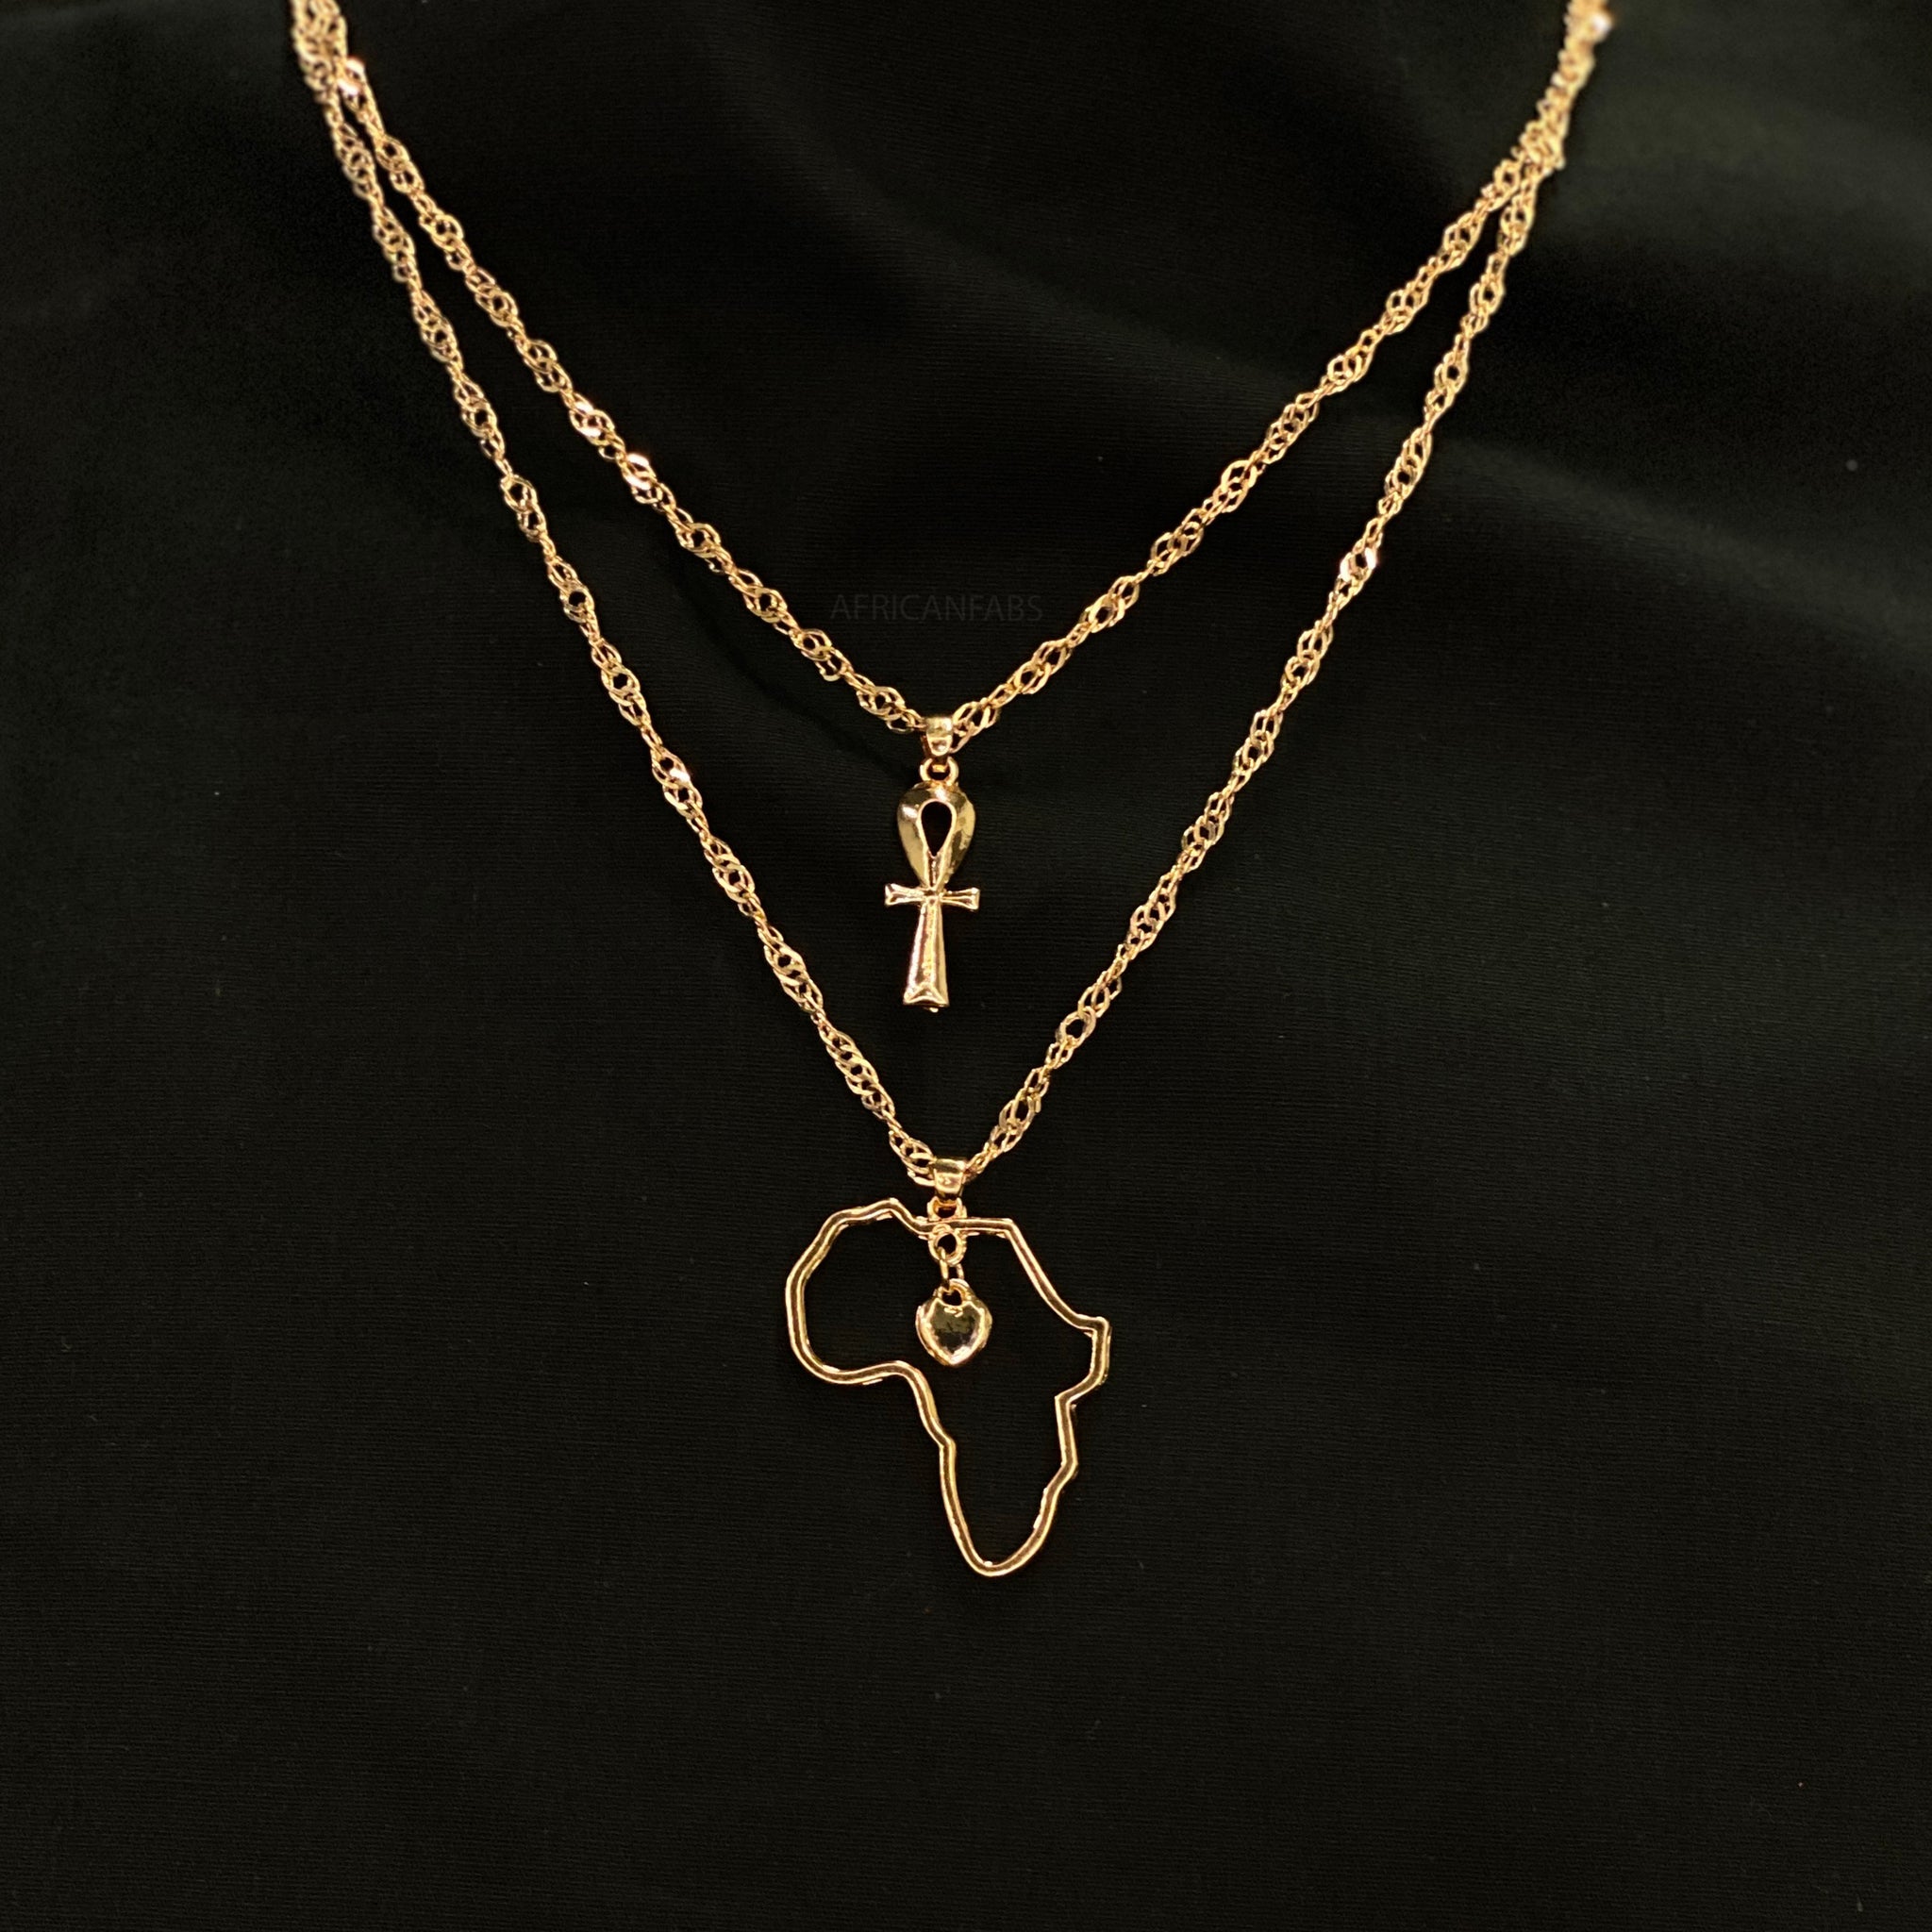 Necklace / pendant - Cross African continent Gold- Double chain